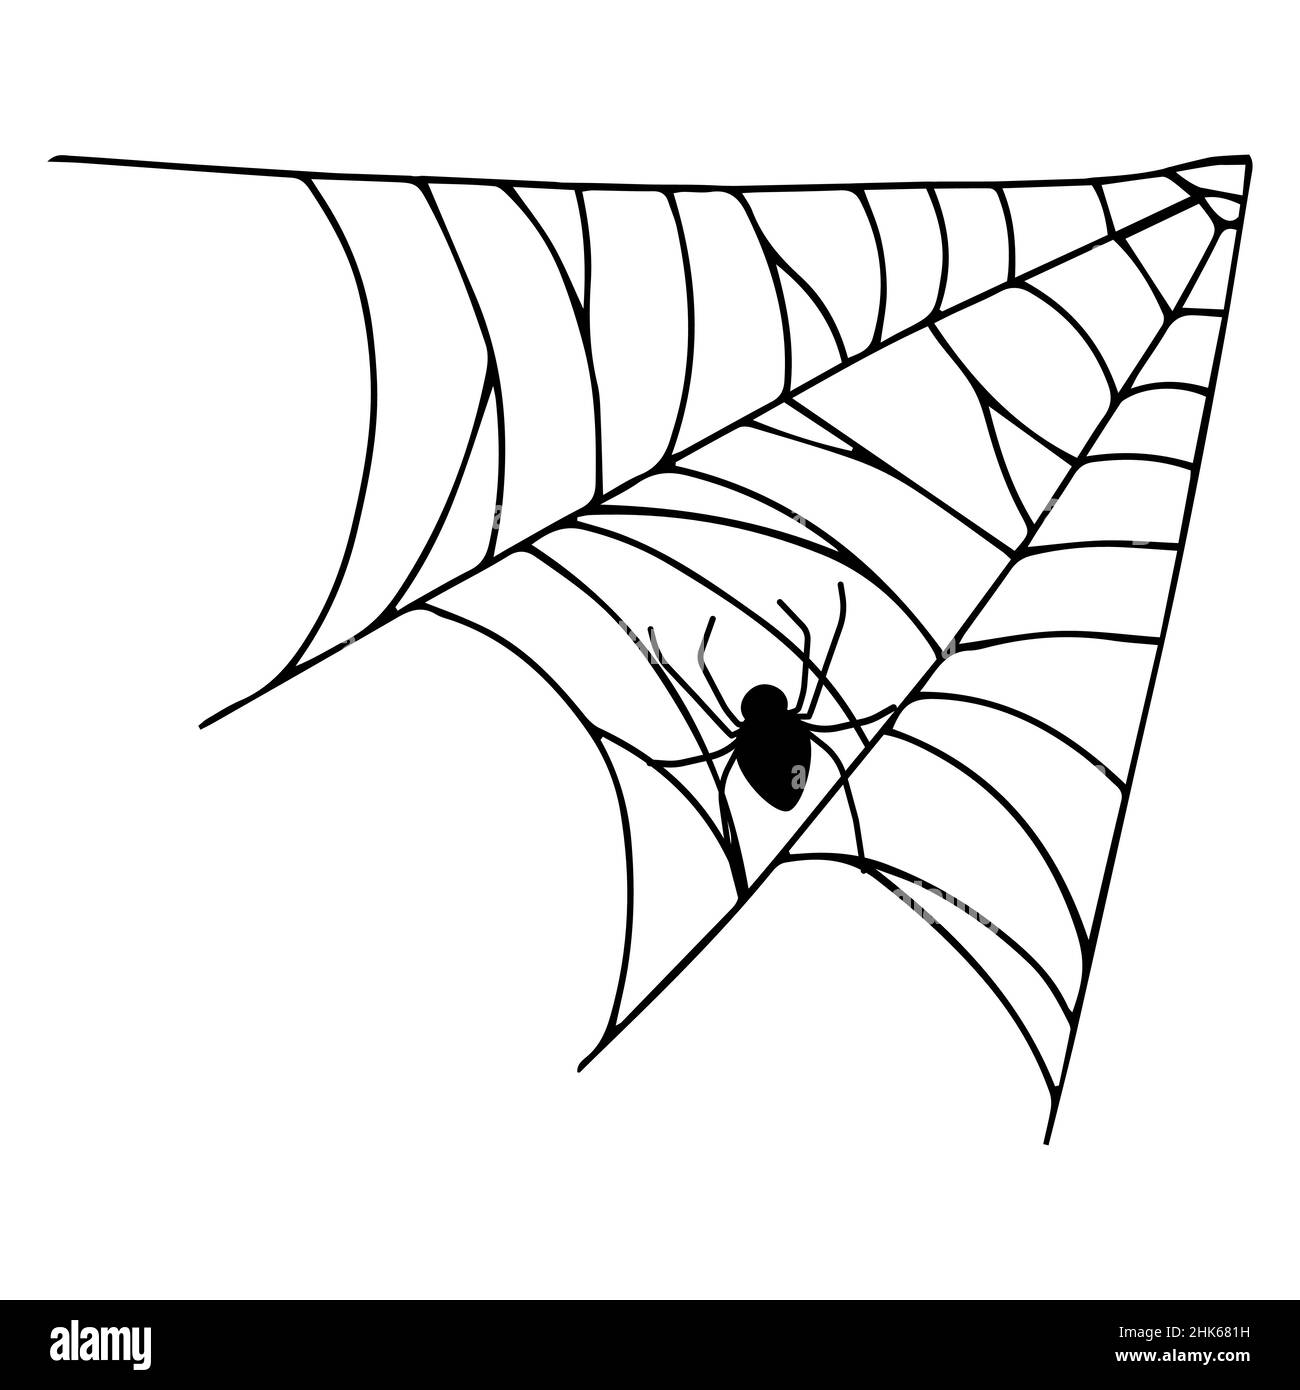 Spider web isolated on white background. Spooky cobwebs with spiders. Outline vector illustration. Design element. Stock Vector